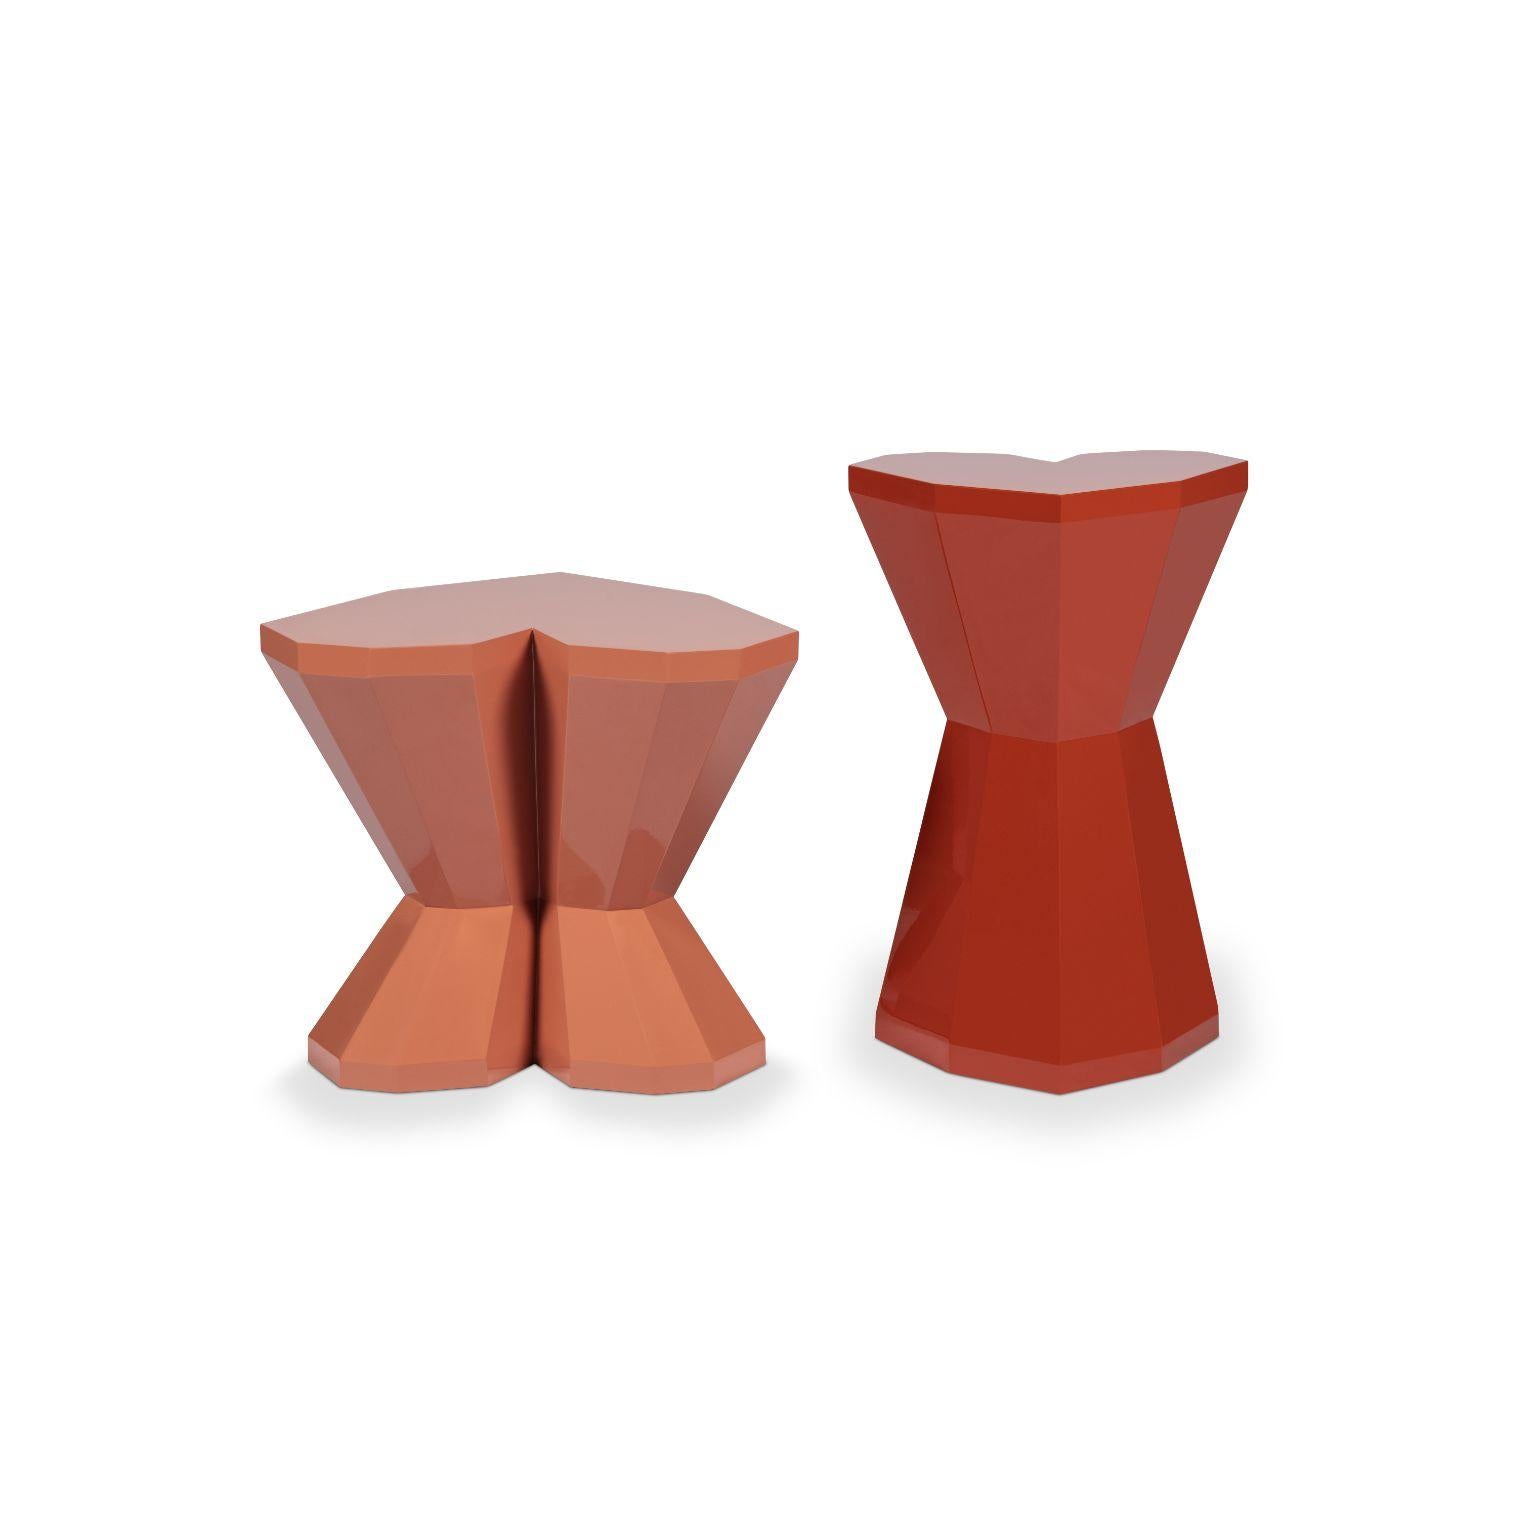 Set of 2 queen heart side tables by Royal Stranger
Dimensions: Medium H 65 x D 45 x W 40 cm
 Small W 60 x D 50 x H 50 cm
Materials: Lacquered Wood, NCS/RAL colors with matte finish
Also available: gold, copper and silver leaf with glossy or